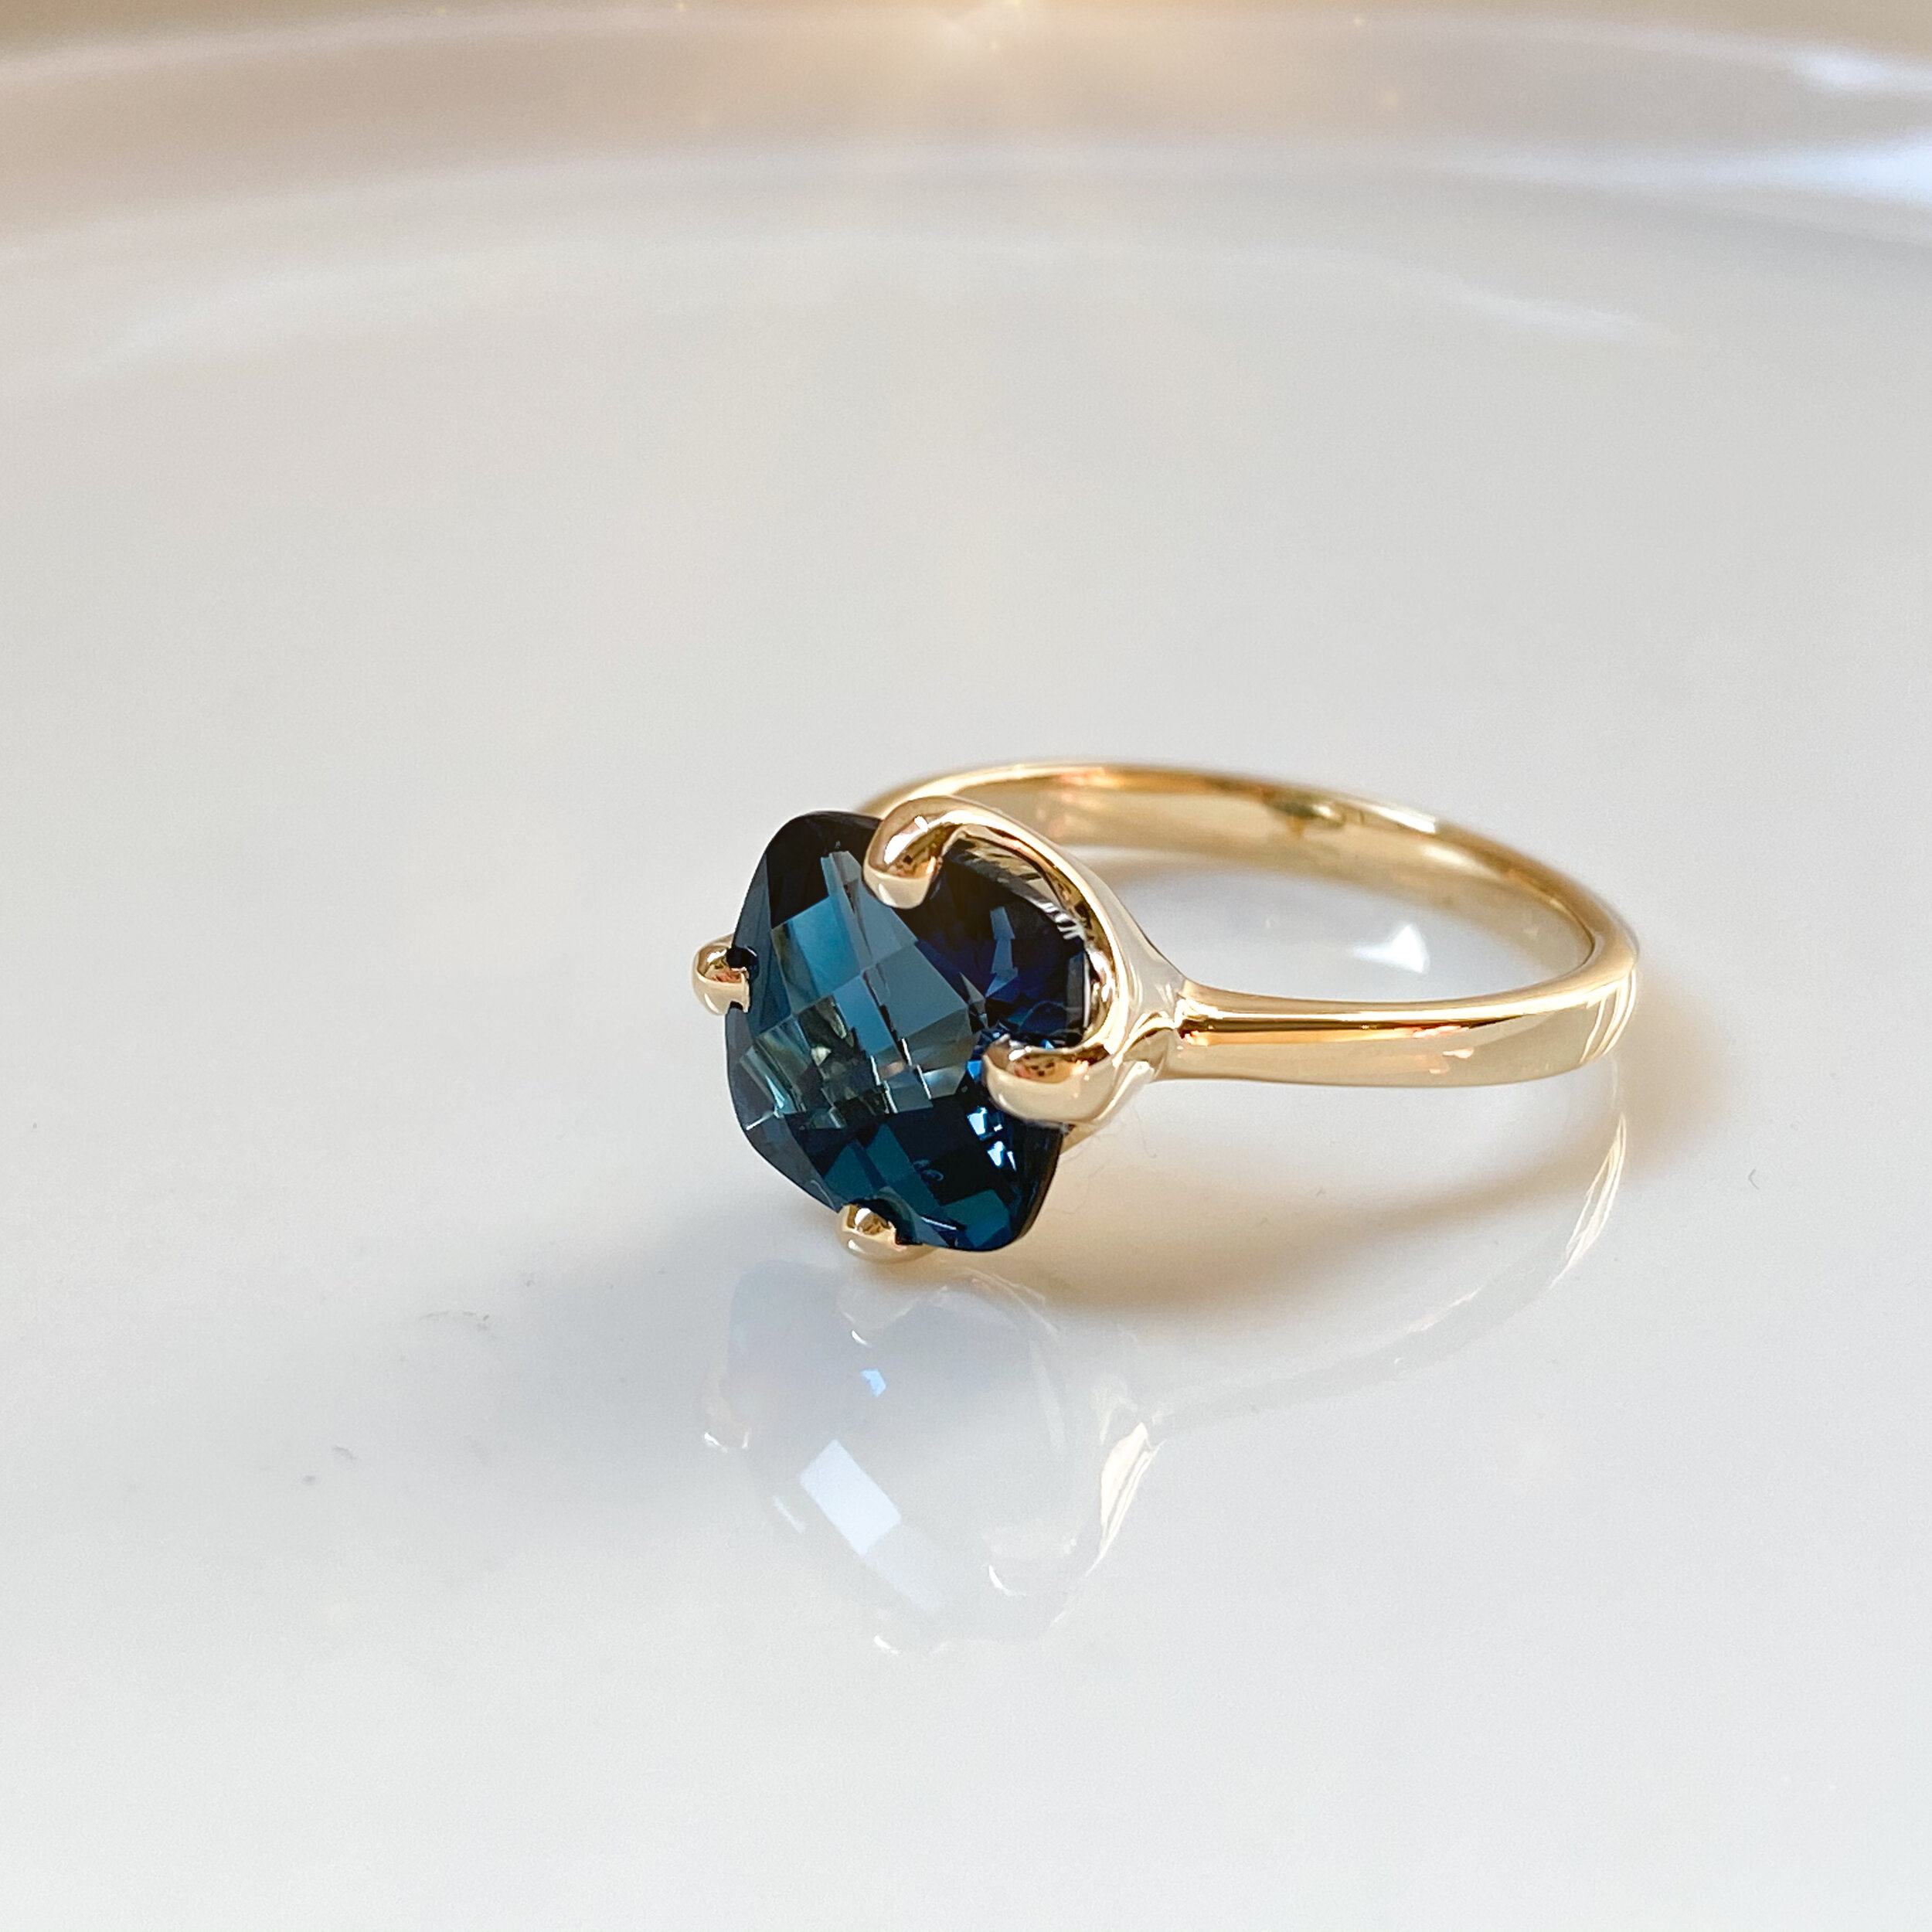 14k yellow gold ring with london blue topaz